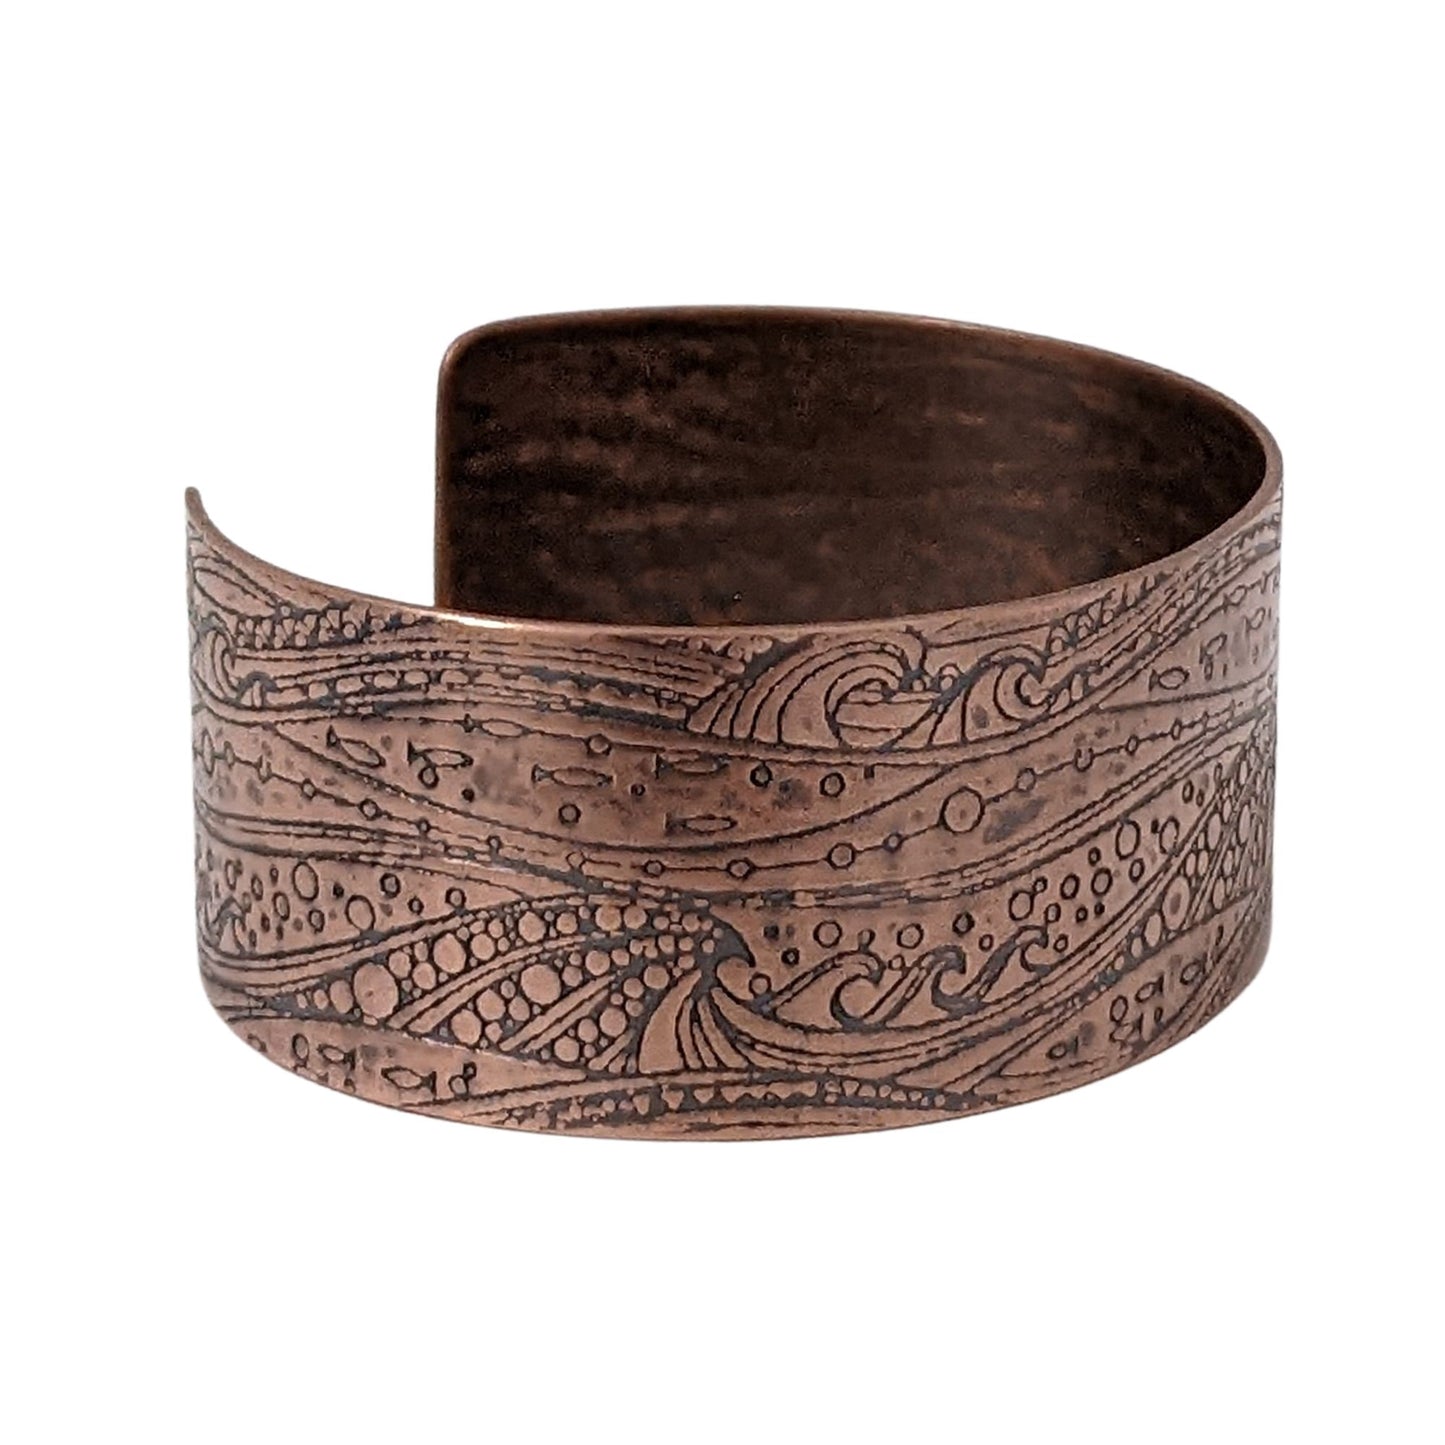 One inch wide copper cuff with a pattern of cresting waves, small fish, and air bubbles. The impression is darkened to highlight the details